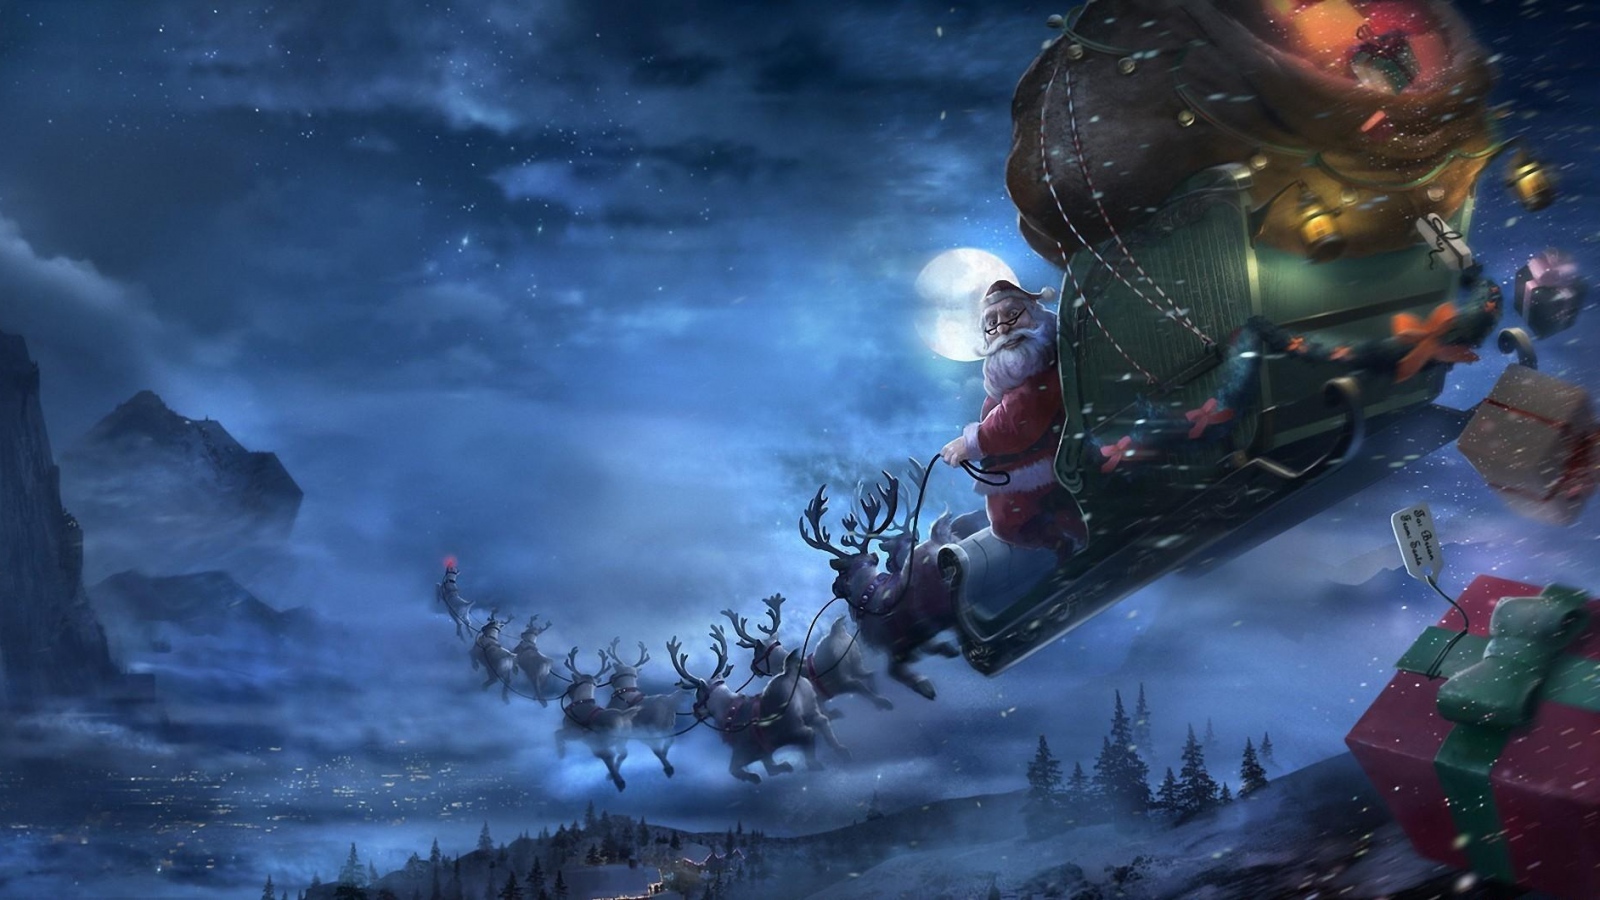 Sleigh Flying Gifts Christmas Wallpaper Background